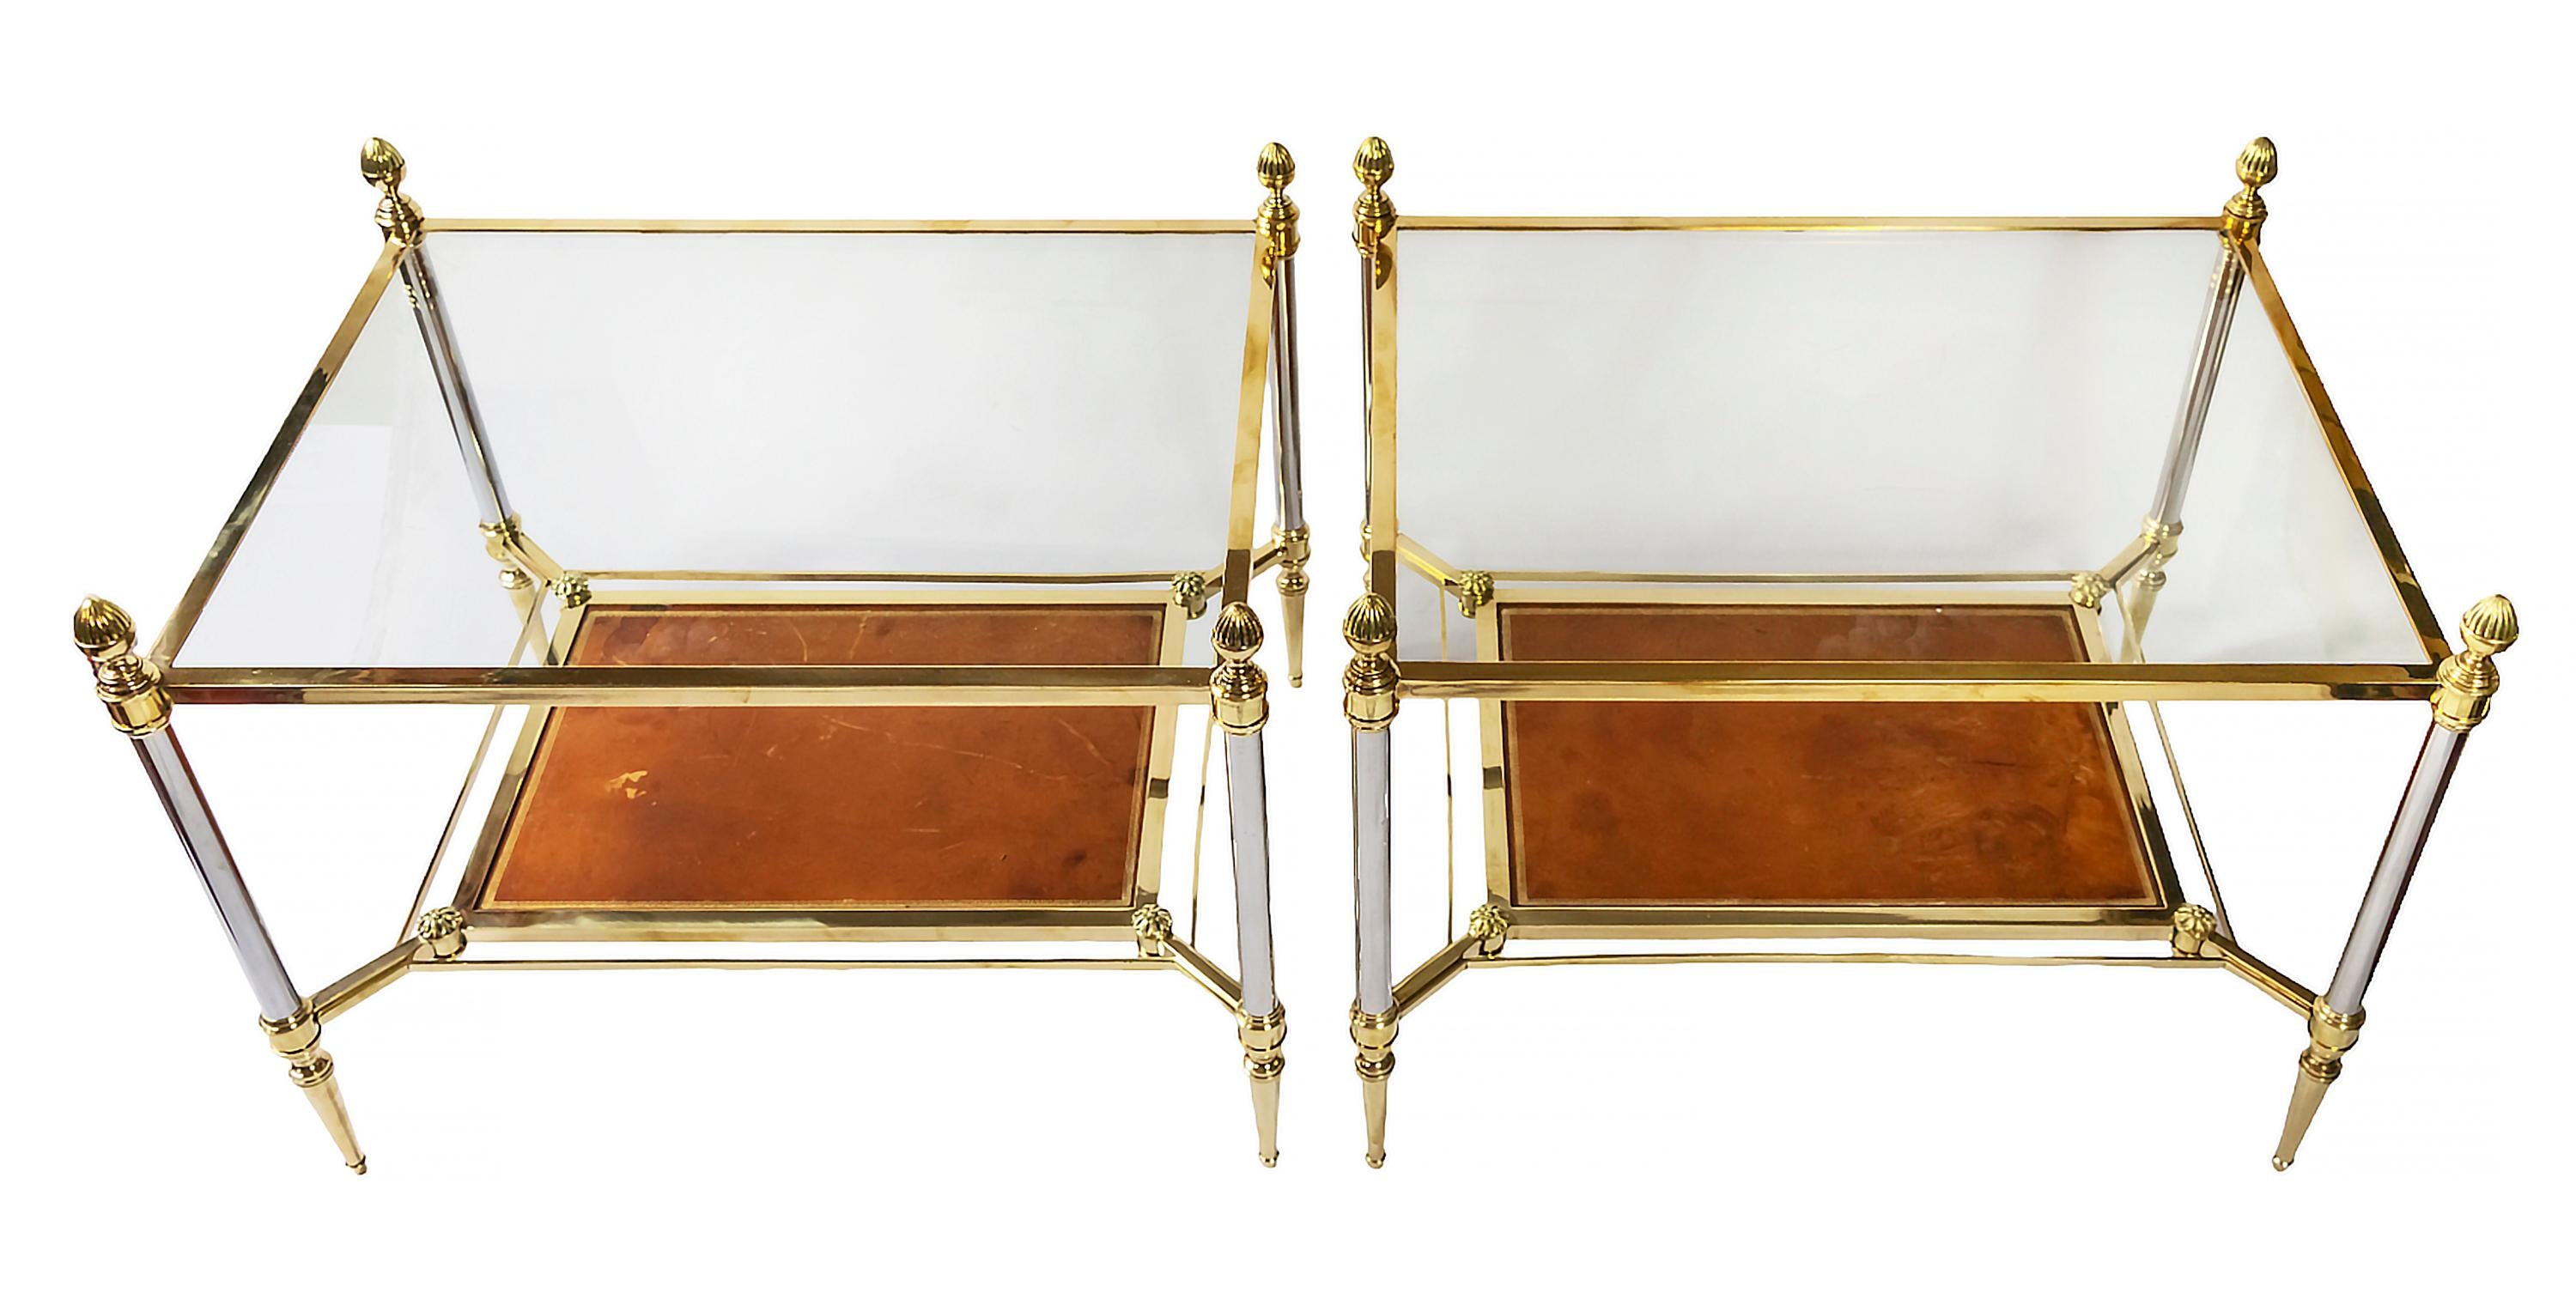 Pair of French vintage side tables by Maison Jansen form 1970's.
The base is in brass and metal decorated with cones and rosettes.
The top is covered with transparent glass and down shelve is in leather decorated/stamped with gold decor ornament.